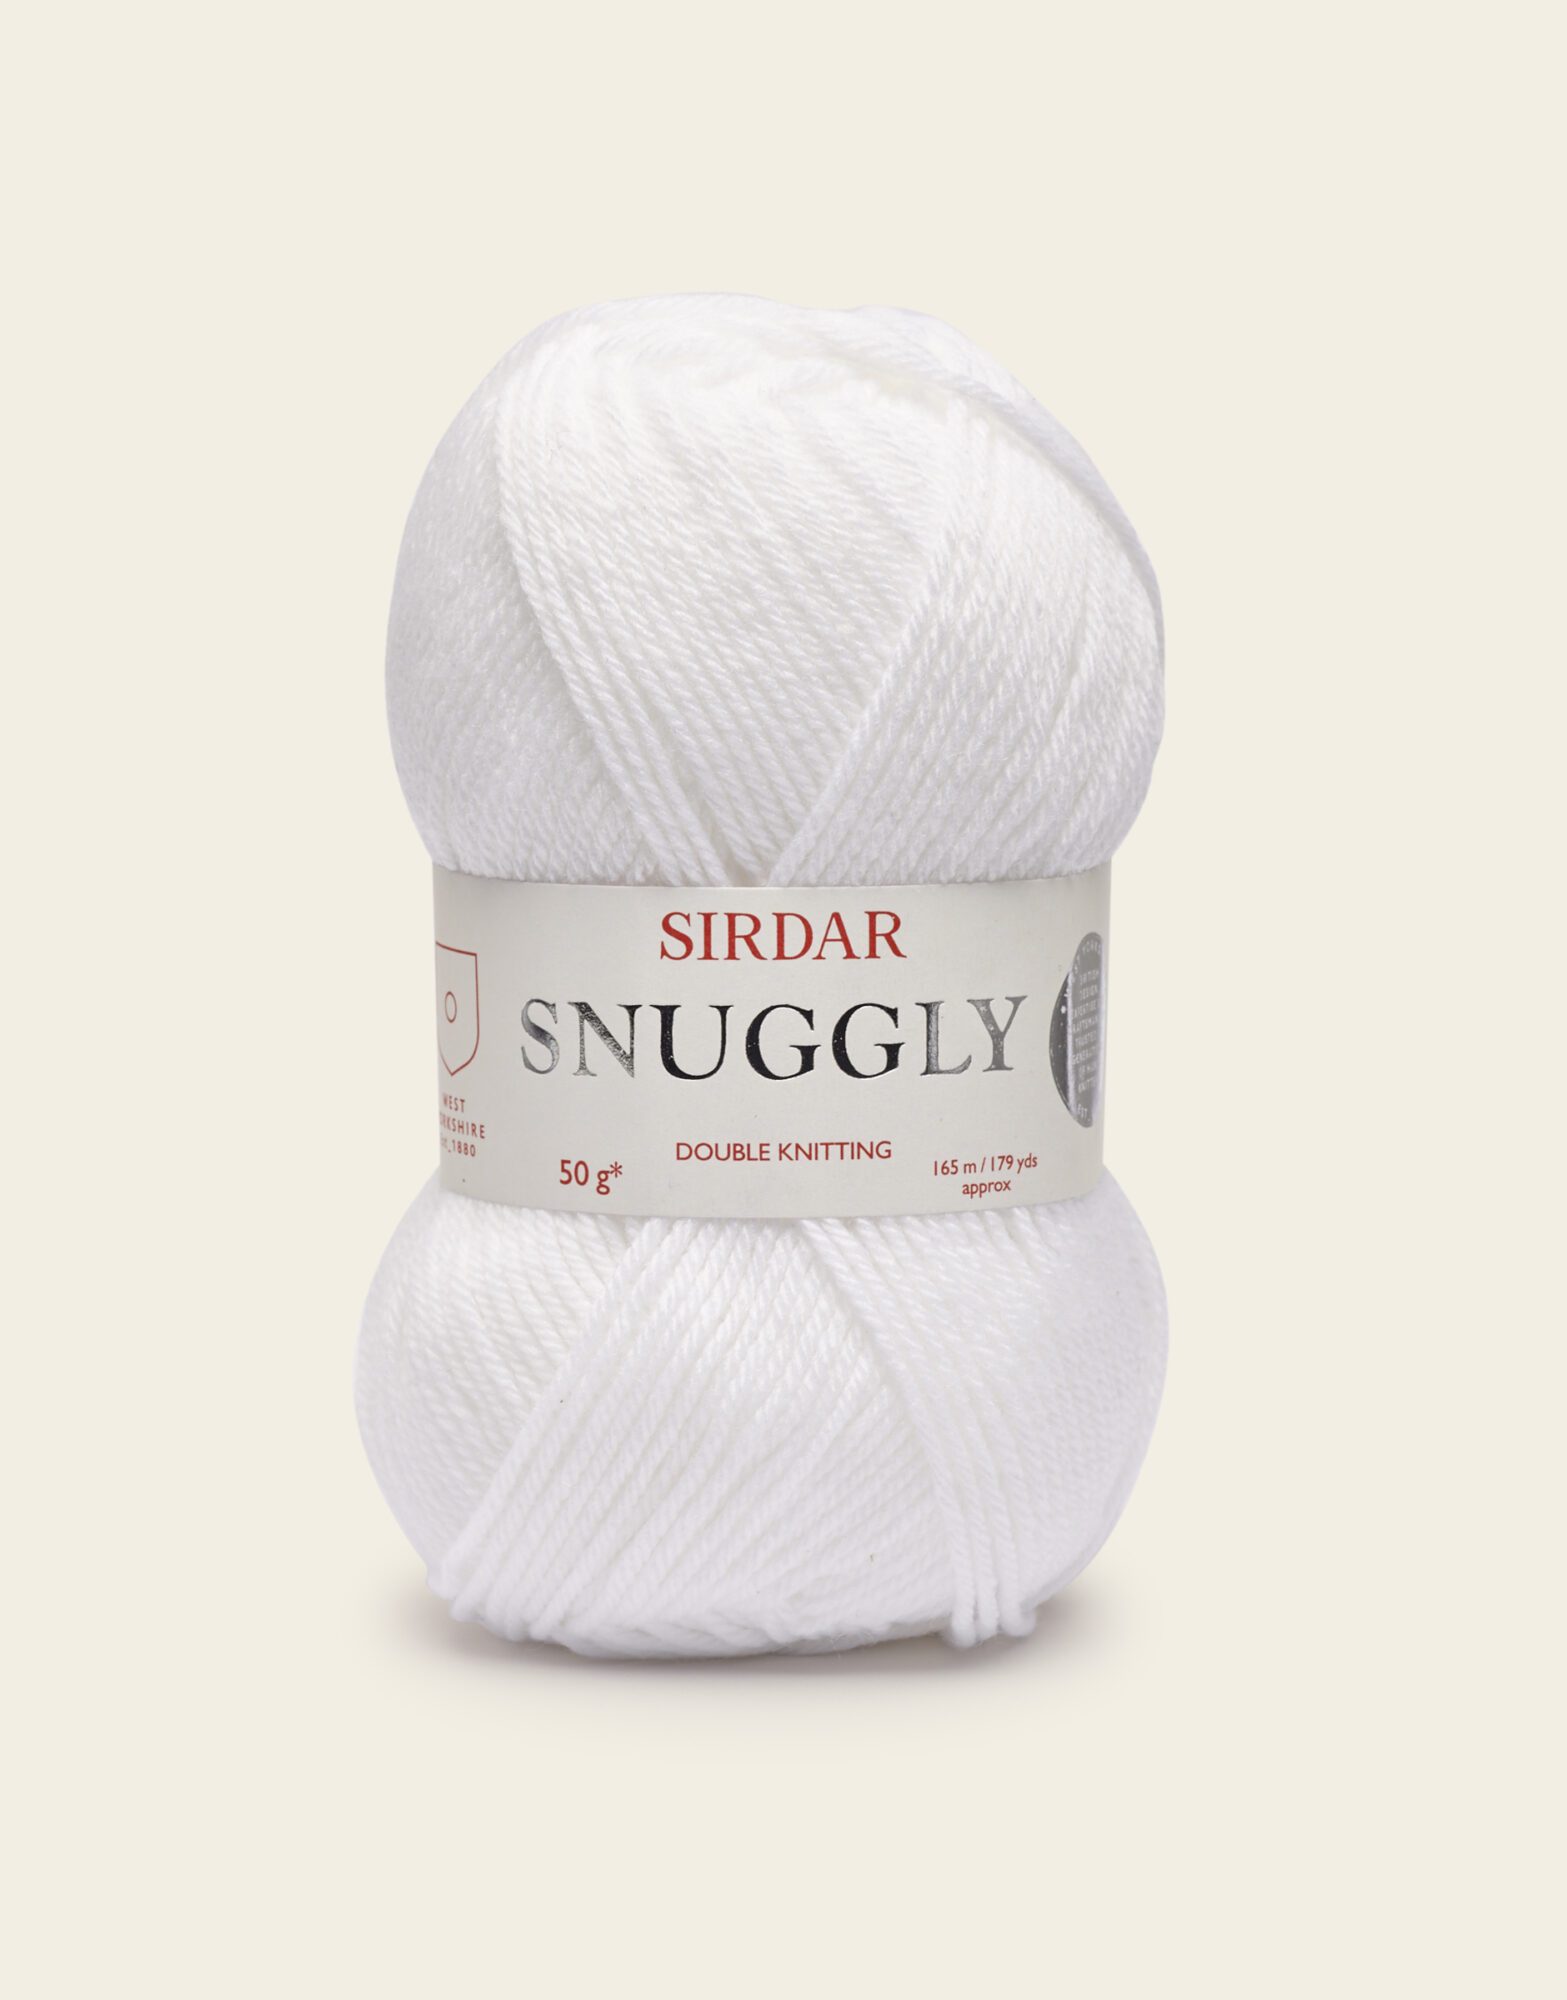 Sirdar Snuggly DK product image